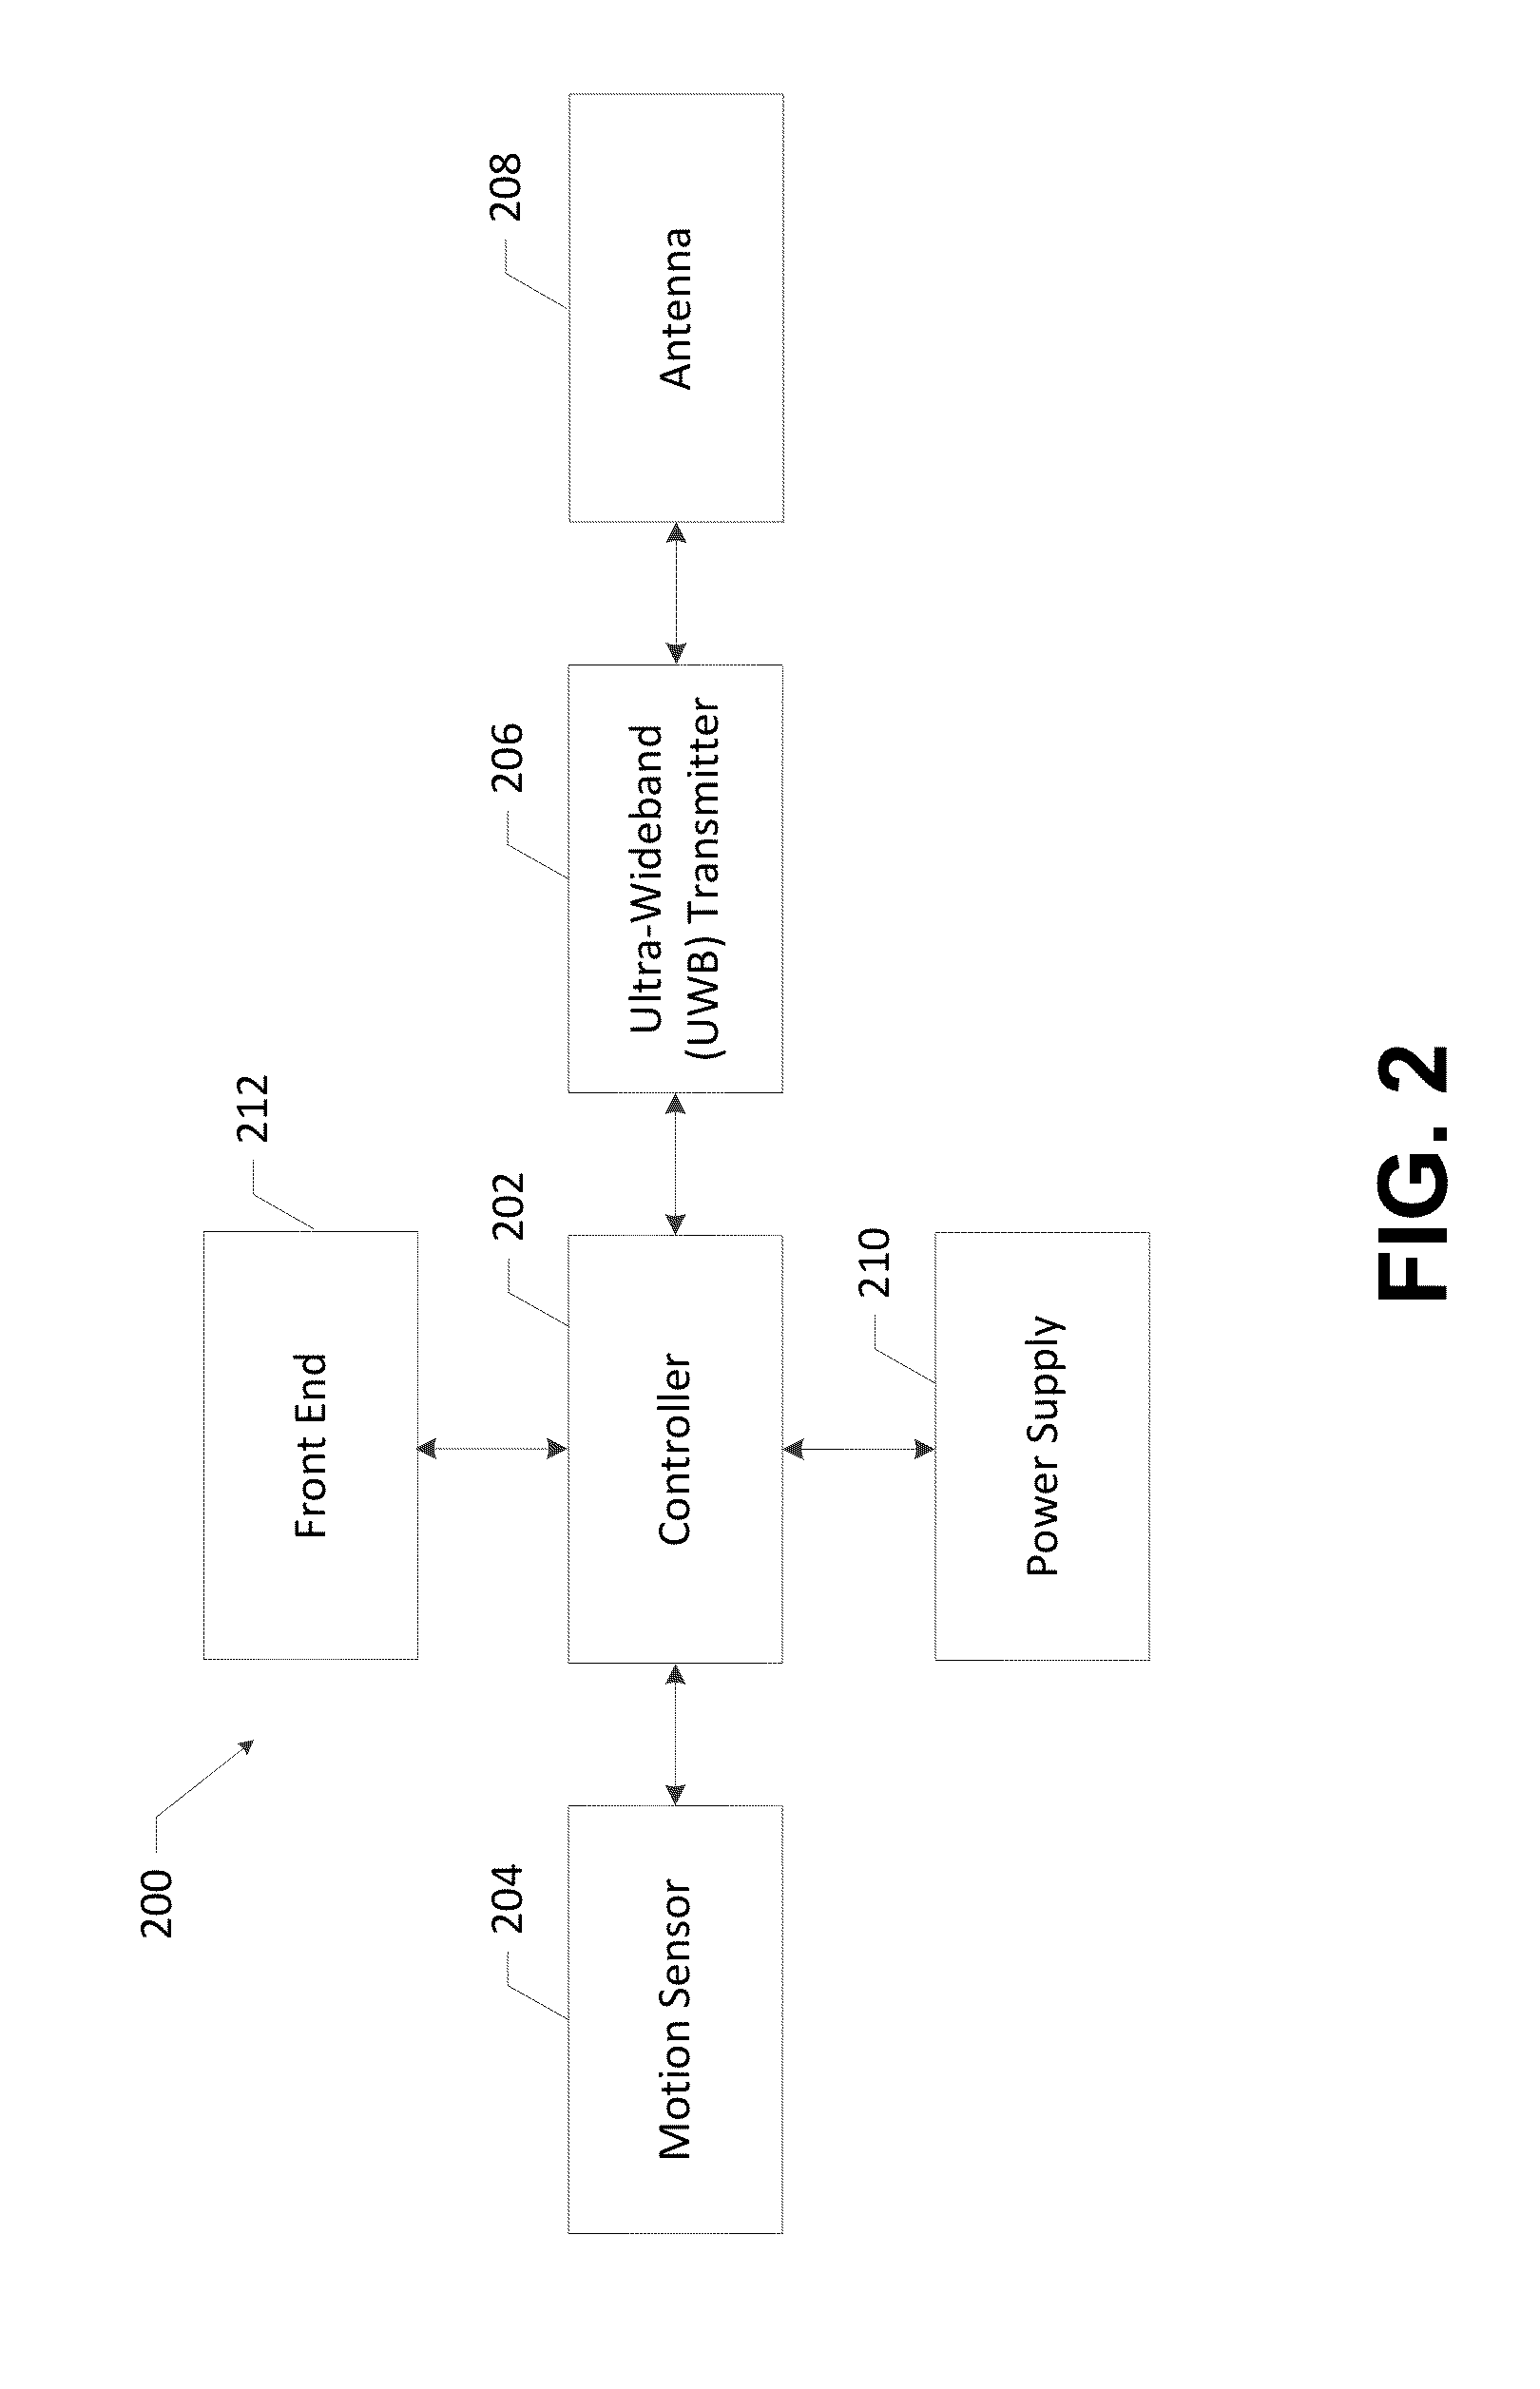 Systems, apparatus and methods for variable rate ultra-wideband communications